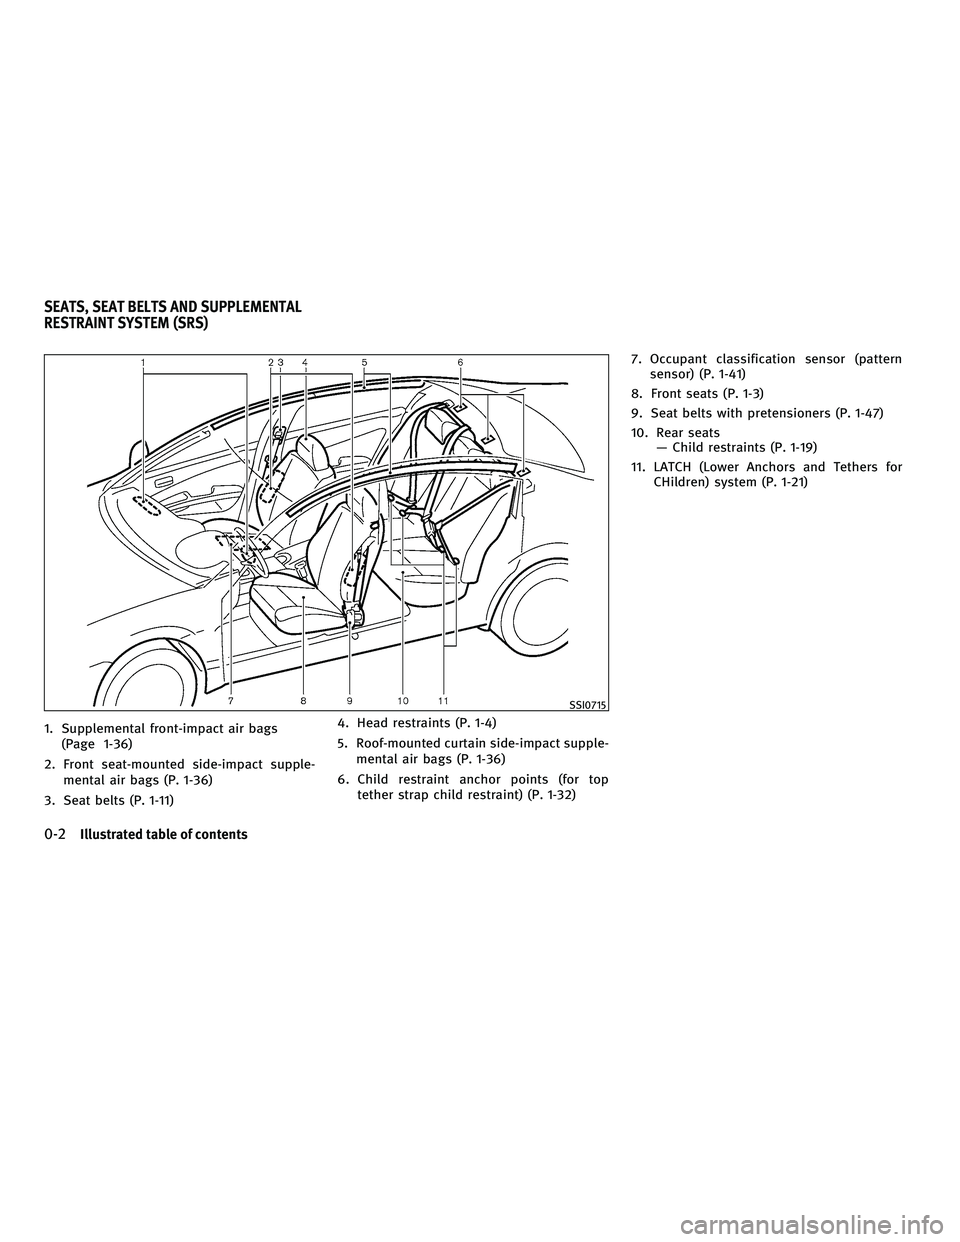 INFINITI M 2011  Owners Manual 1. Supplemental front-impact air bags(Page 1-36)
2. Front seat-mounted side-impact supple- mental air bags (P. 1-36)
3. Seat belts (P. 1-11) 4. Head restraints (P. 1-4)
5. Roof-mounted curtain side-im